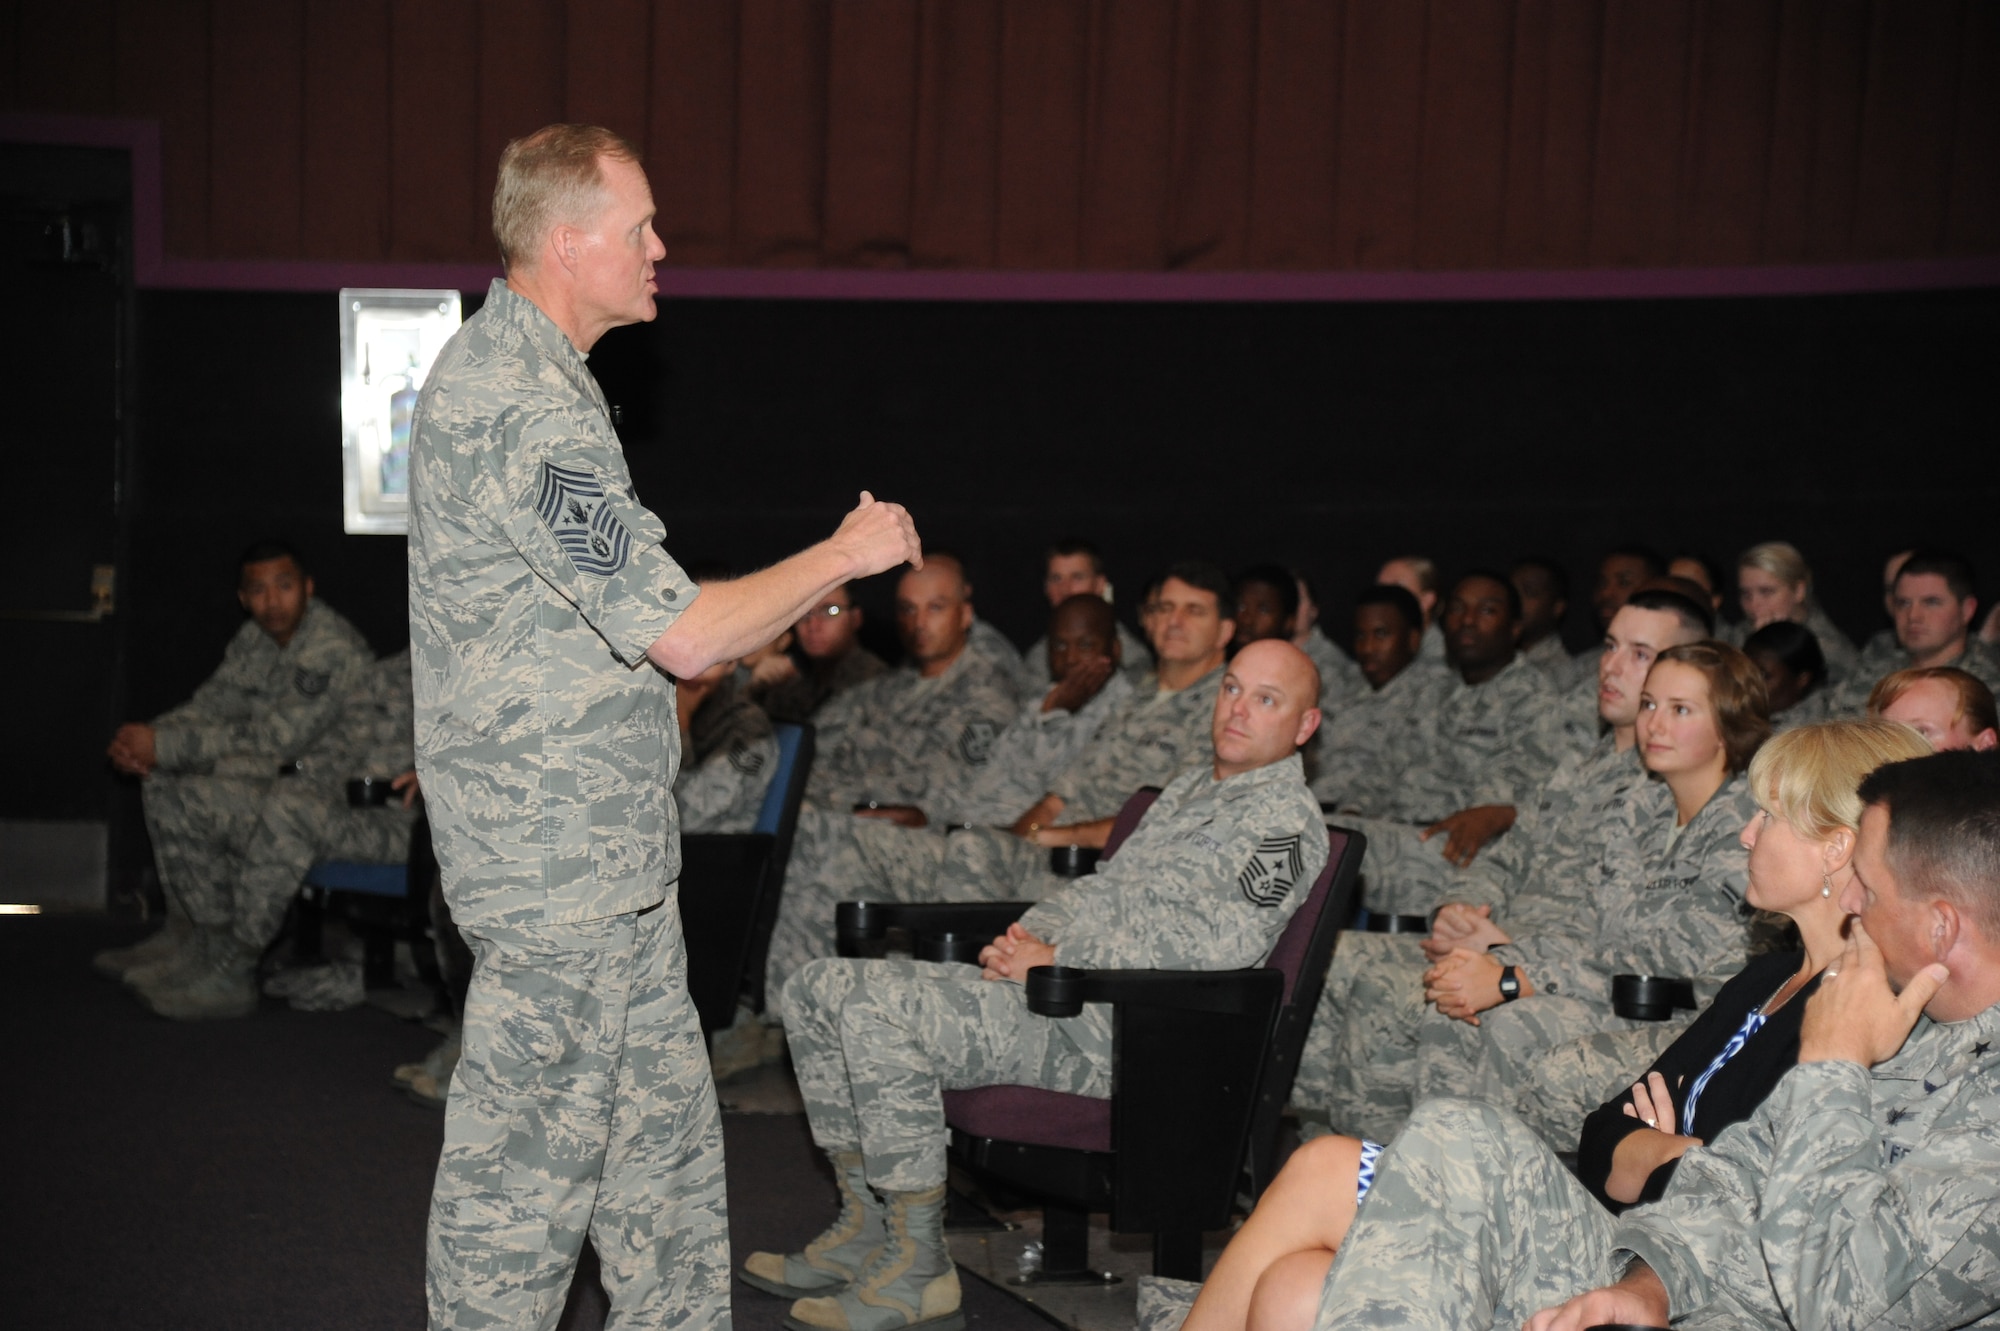 Chief Master Sgt. of the Air Force James A. Cody addresses the audience during an All Call for Airmen and NCOs at the Welch Theater during a two-day visit of Keesler Air Force Base, Miss., Sept. 22-23, 2014.  The purpose of the visit was to thank Team Keesler members and further understand the various missions here, including 2nd Air Force, 81st Training Wing and the 403rd Wing. (U.S. Air Force photo by Kemberly Groue)